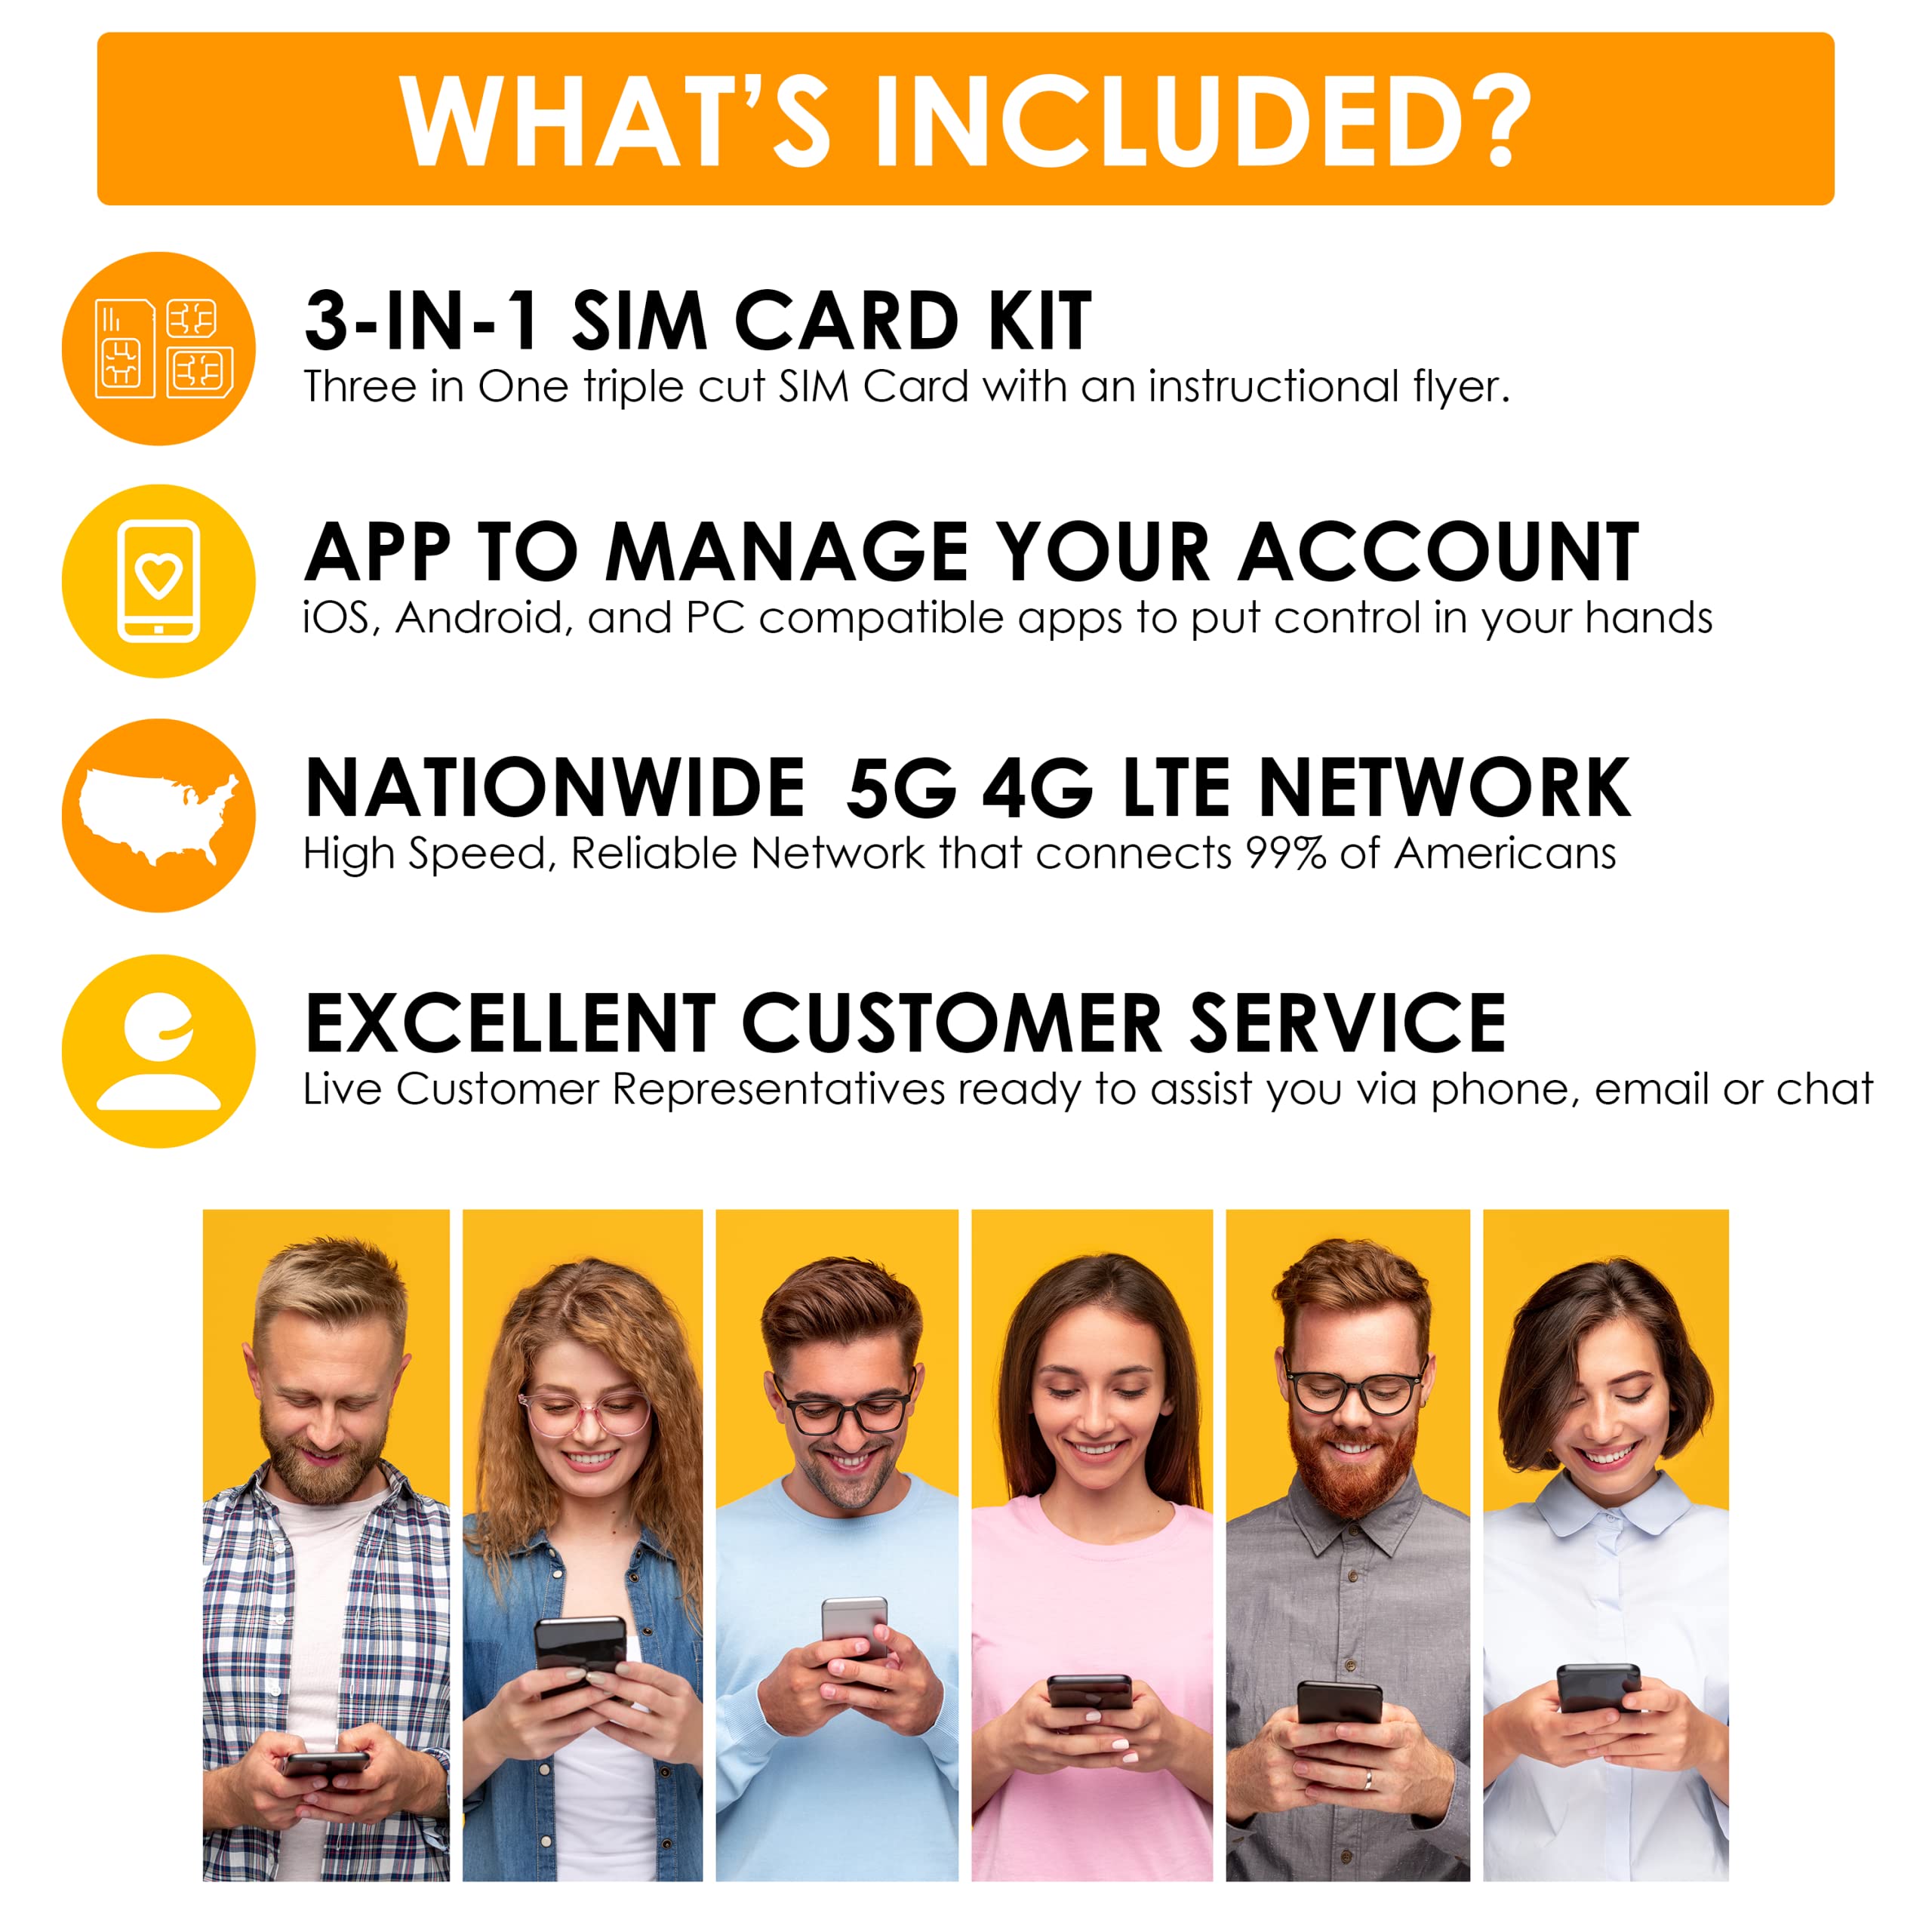 $5/Month SpeedTalk Mobile Prepaid SIM Card - Monthly 250 Minutes Talk OR 250 SMS Text OR 250MB Data No Contract 12 Months Smart Phone Plan